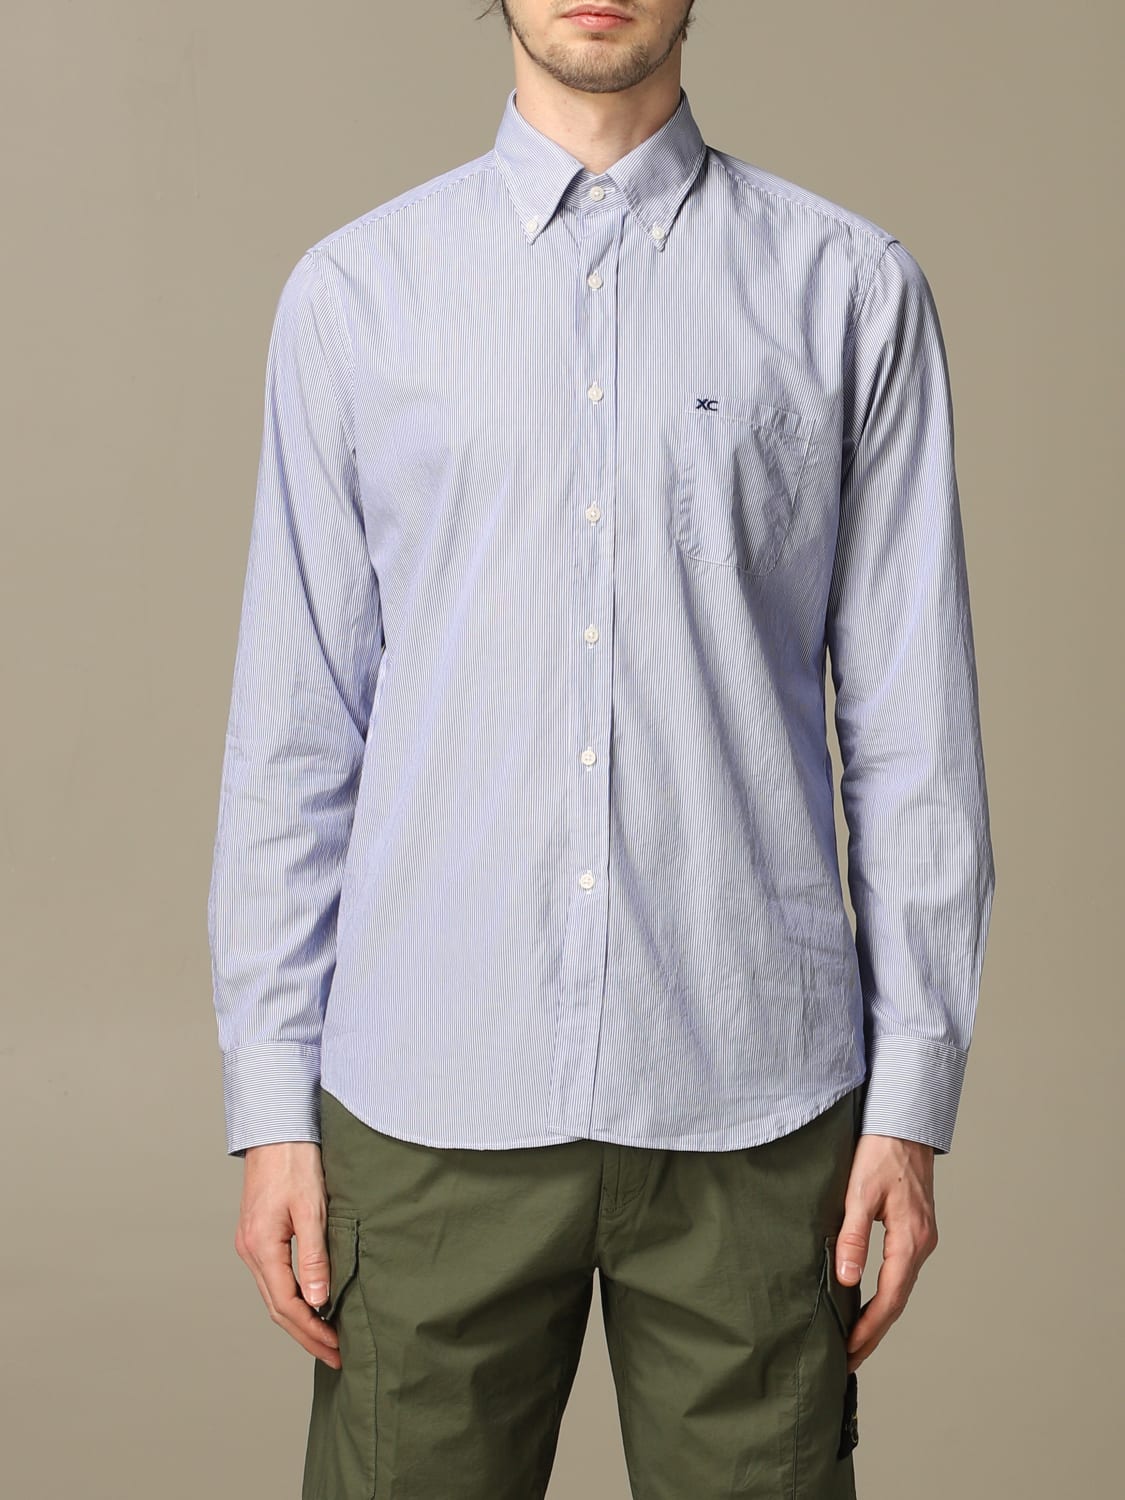 Xc -  shirt in micro-check washed cotton